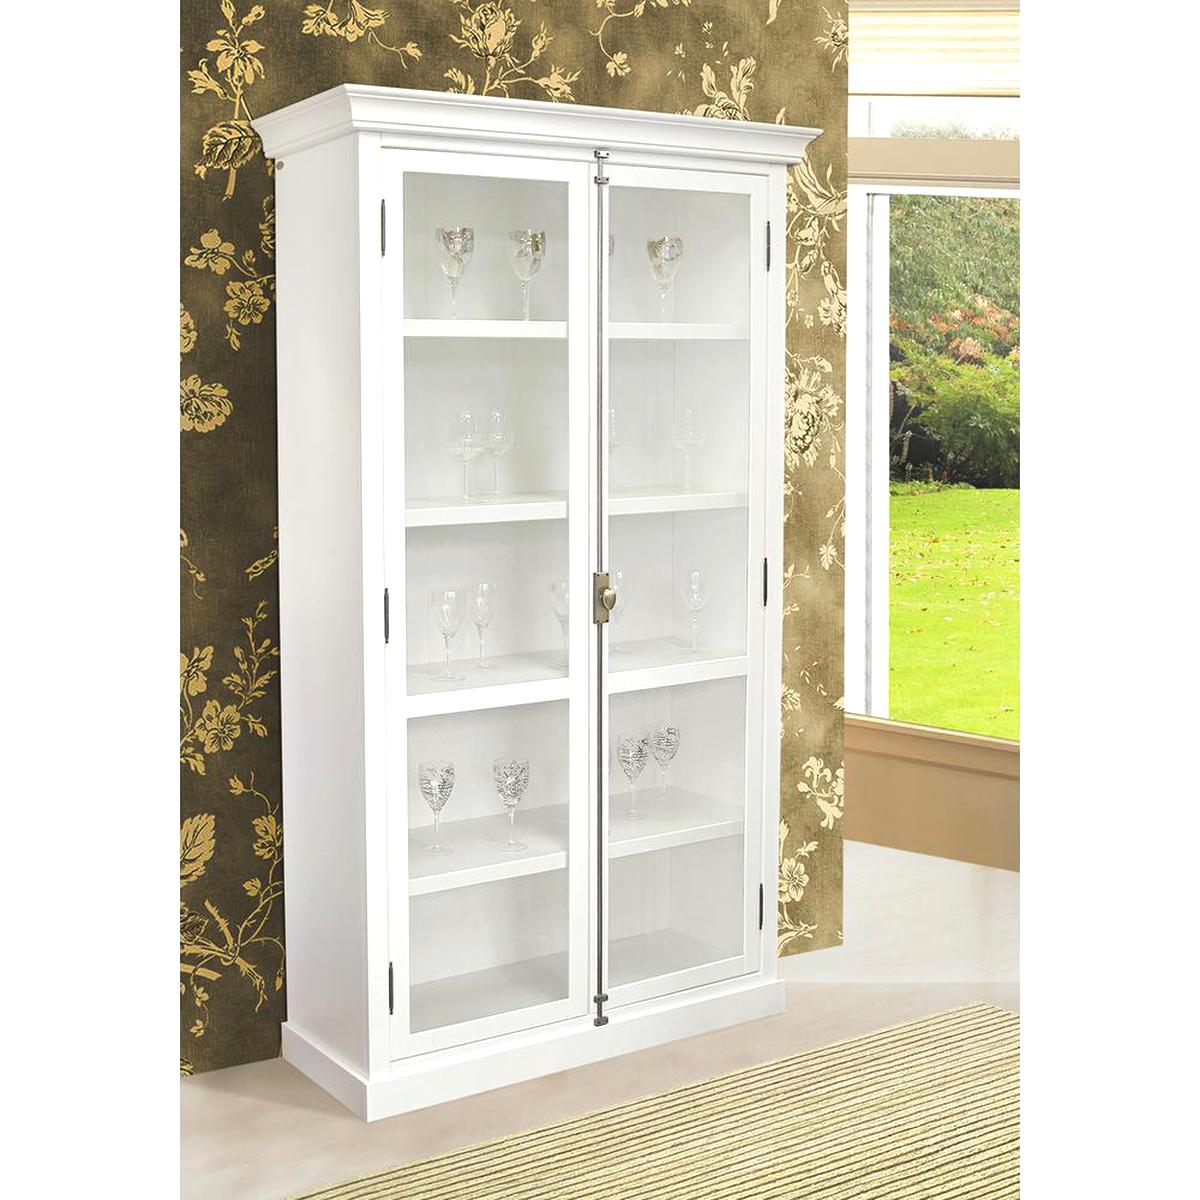 White Display Cabinet For Sale In Uk View 74 Bargains